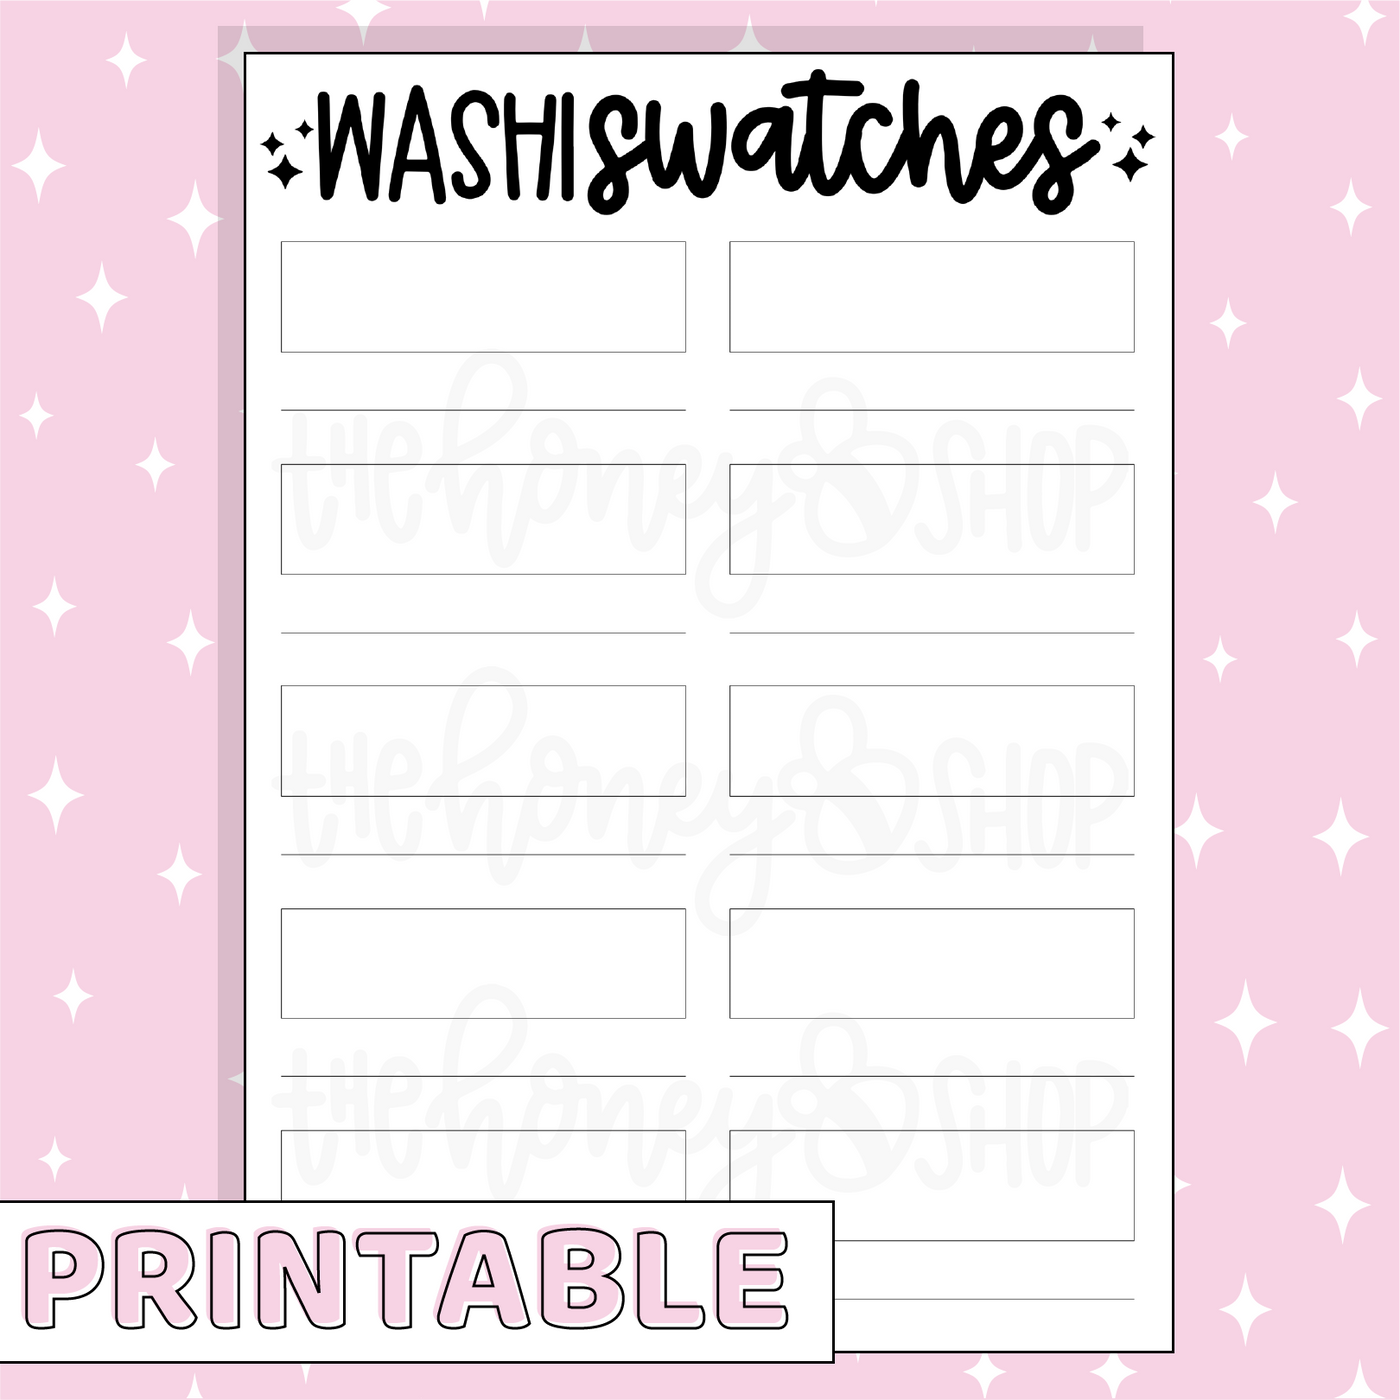 Washi Swatches Printable Bee-6 Full Page Sticker | B6 Planner | Printable Planner Stickers